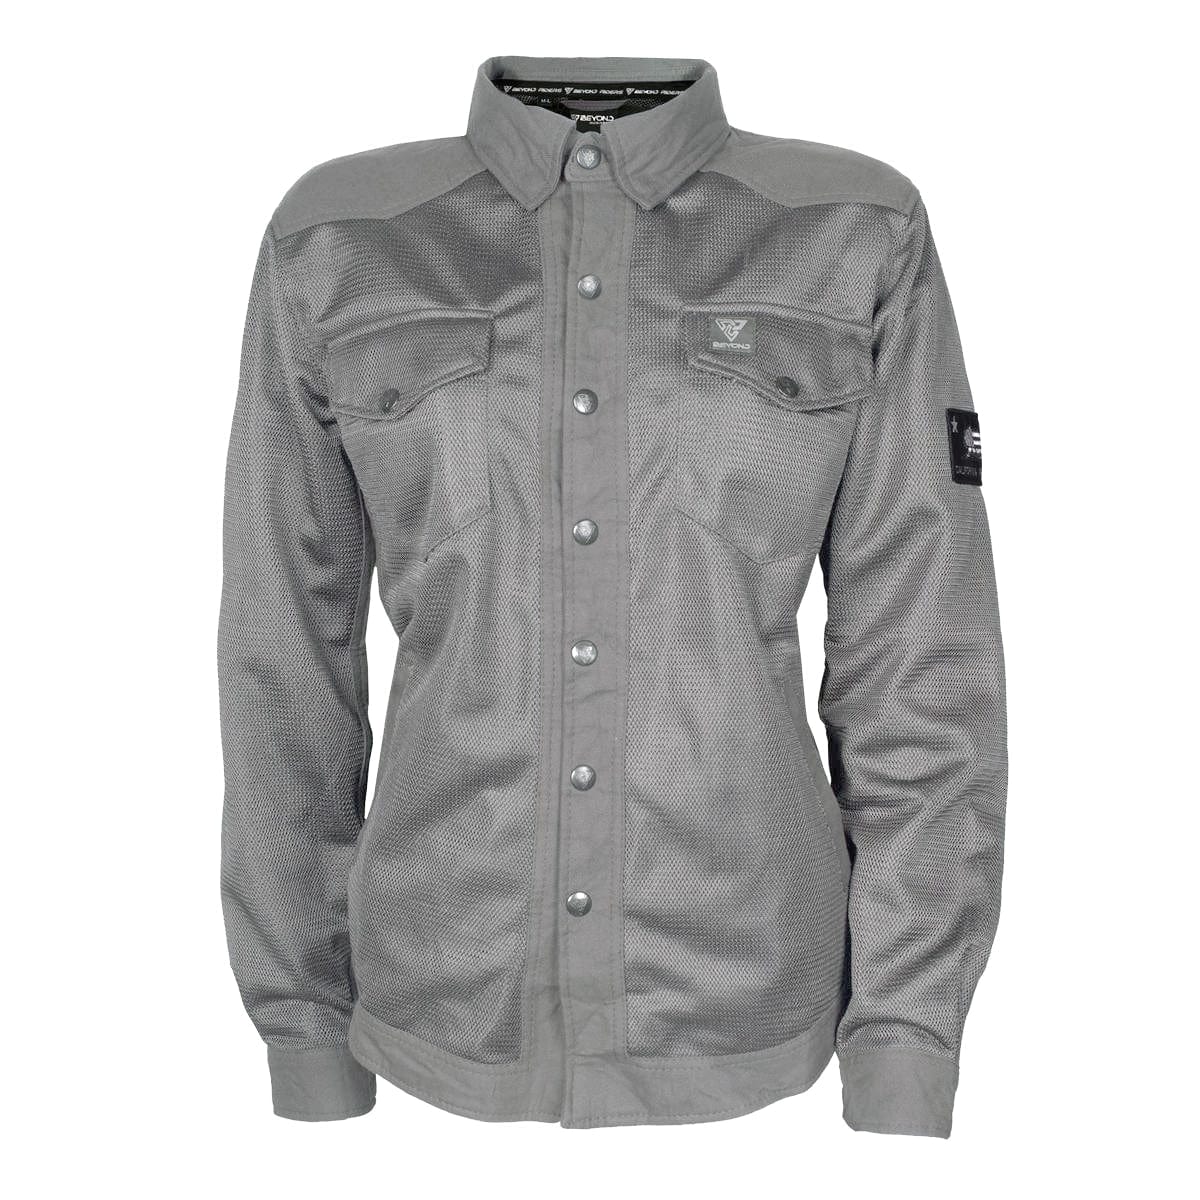 Protective Summer Mesh Shirt for Women - Grey Solid